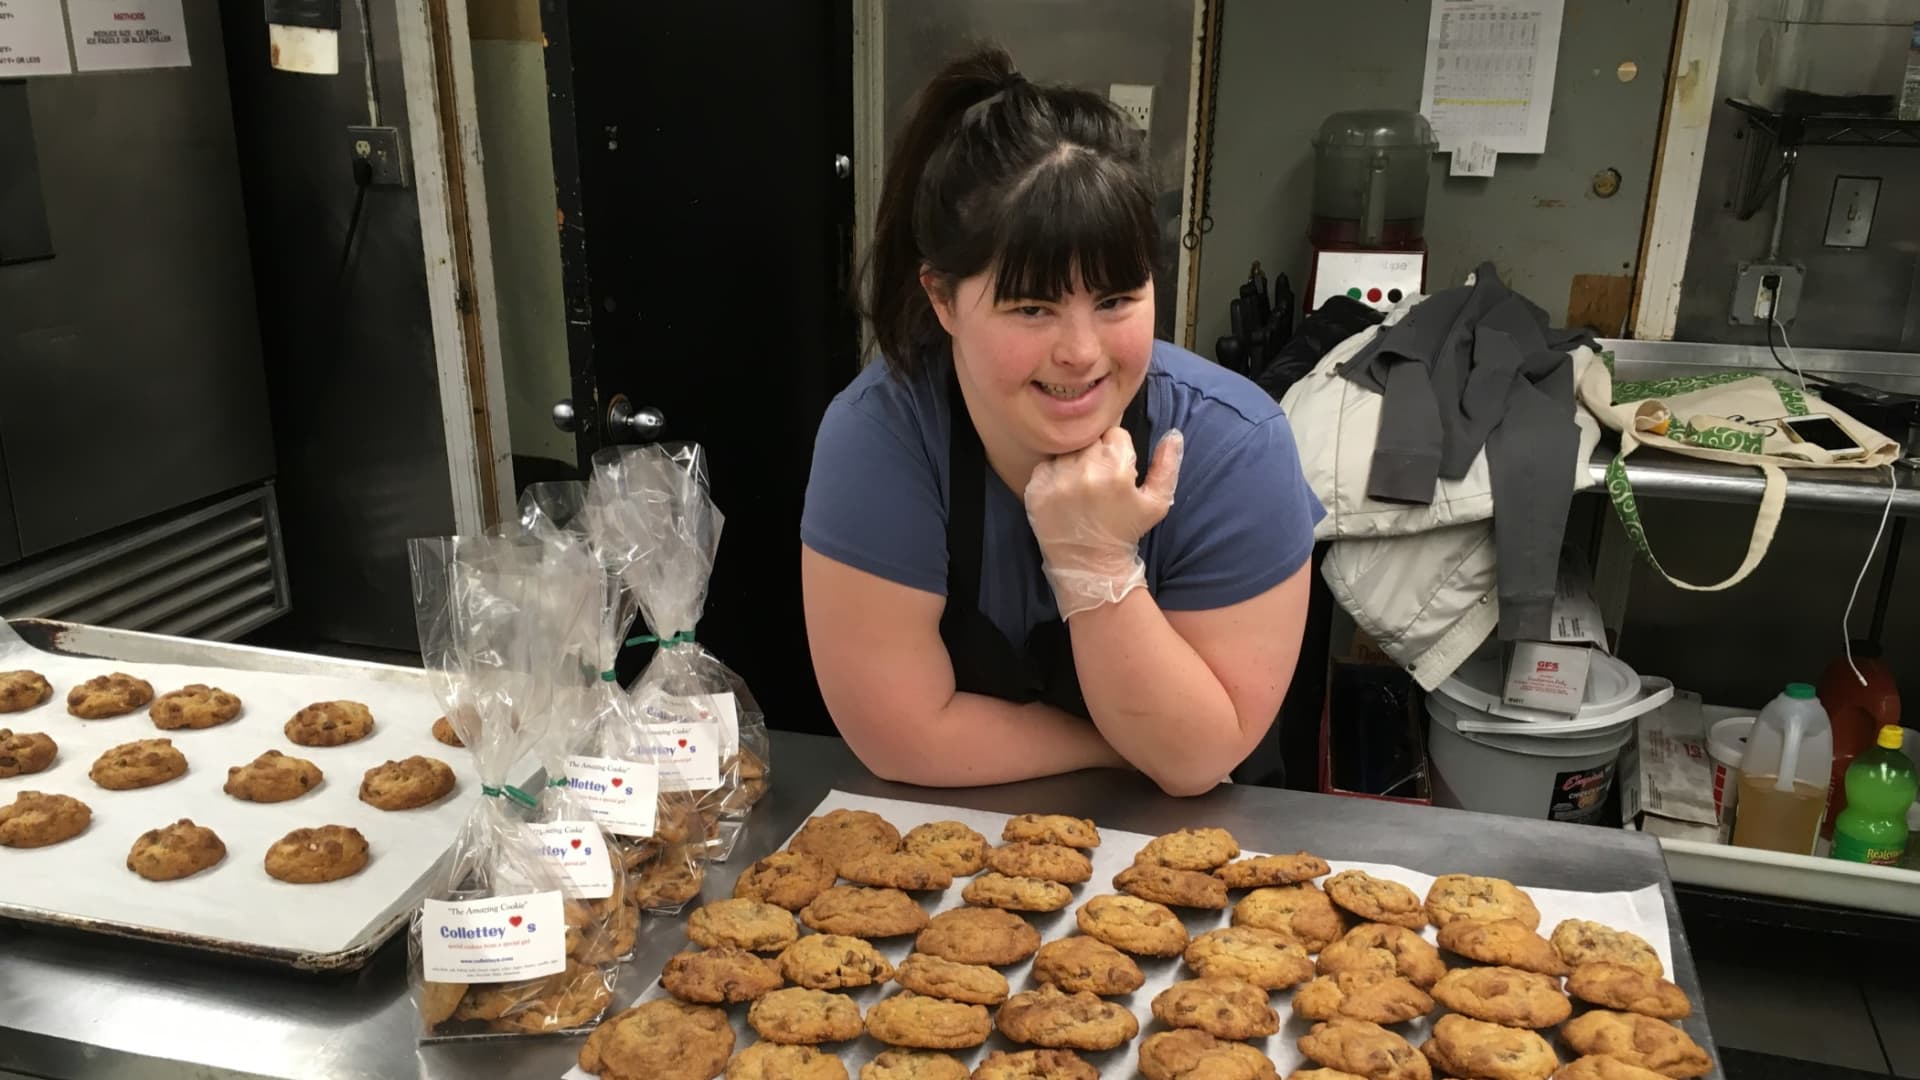 DiVitto's most popular offering is her cinnamon chocolate chip cookies, called The Amazing Cookie.